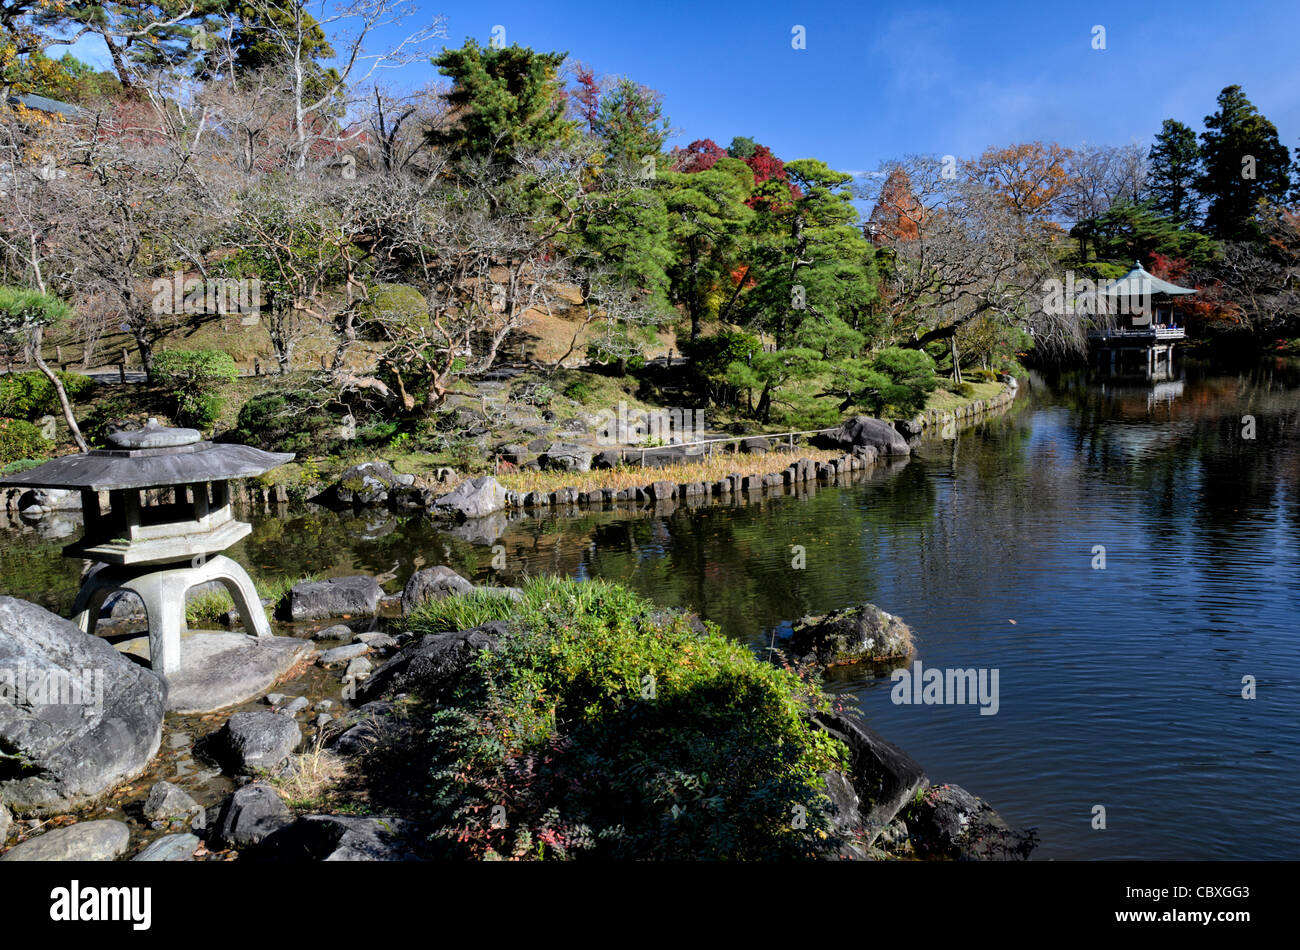 NARITA, Japan - The Narita-san temple, also known as Shinsho-Ji (New Victory Temple), is Shingon Buddhist temple complex, was first established 940 in the Japanese city of Narita, east of Tokyo.. The complex includes extensive landscaped gardens. Stock Photo